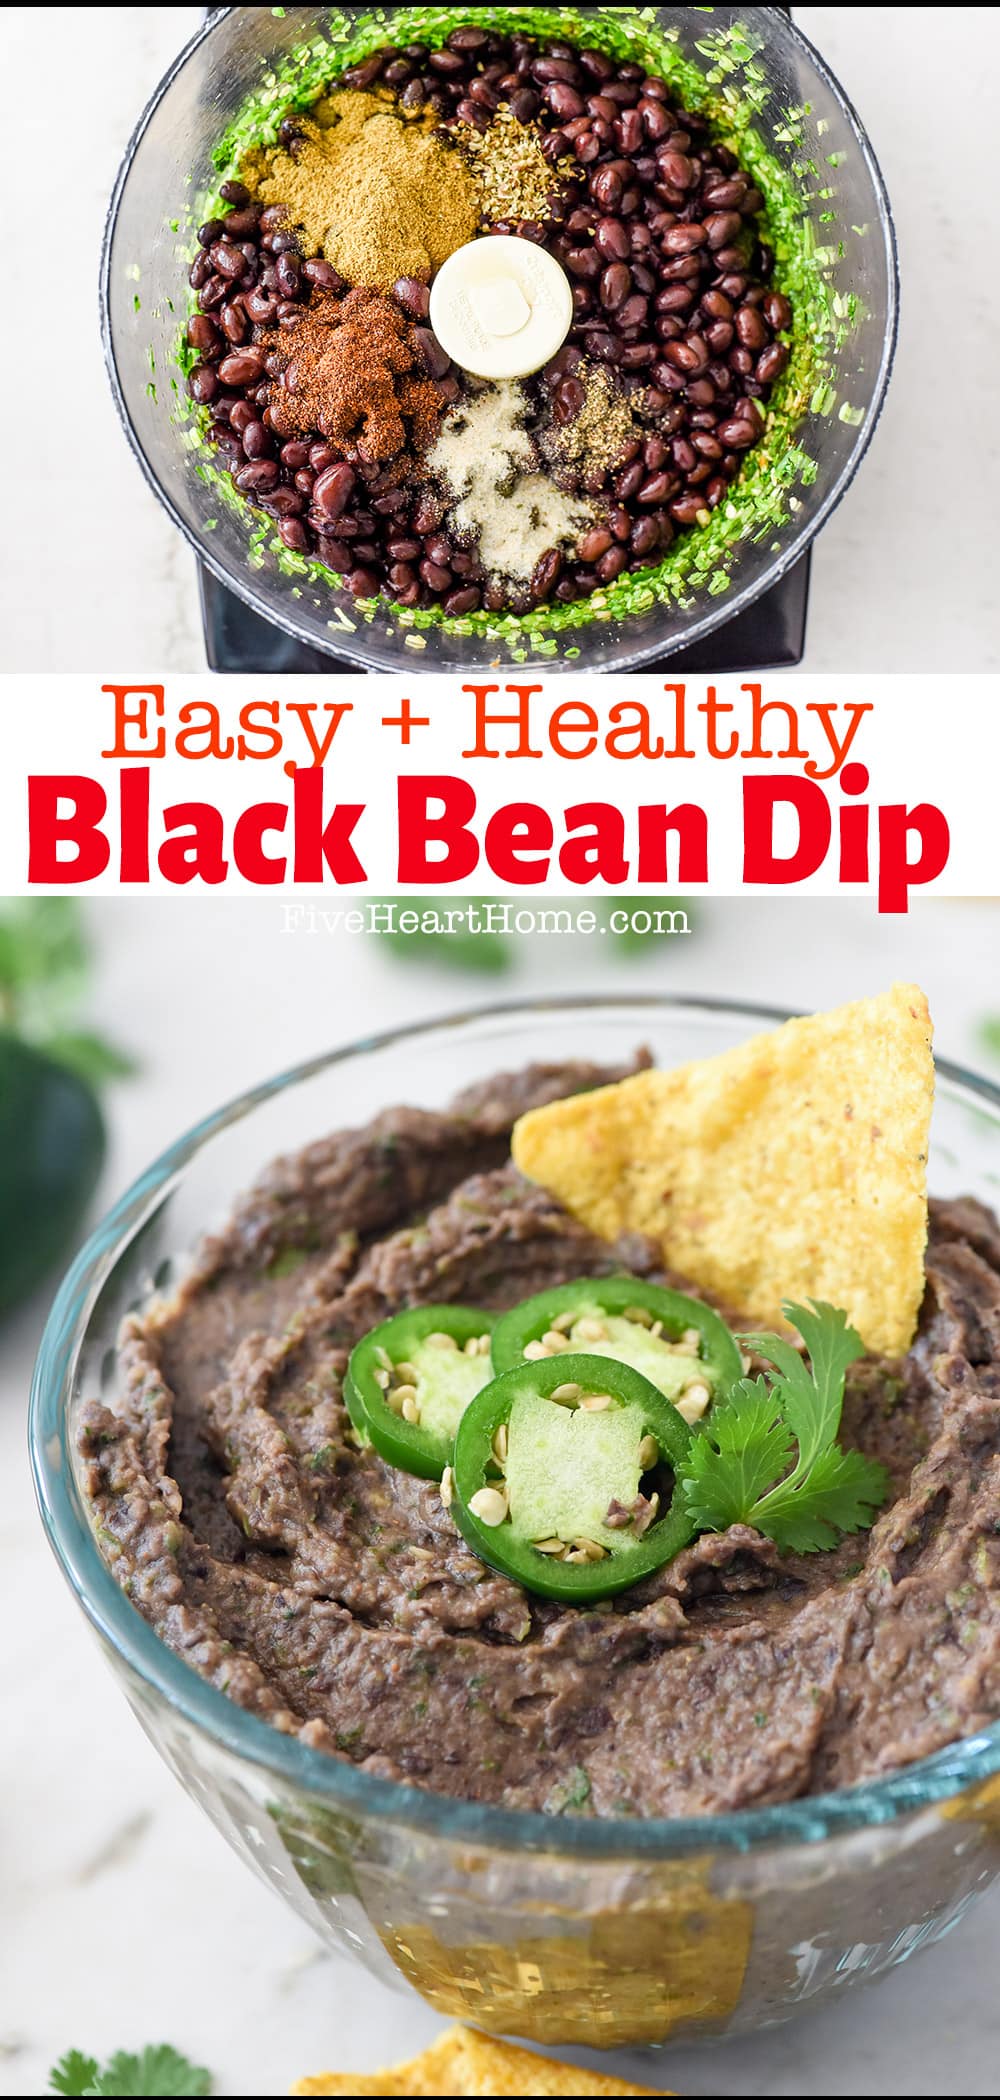 Black Bean Dip ~ this healthy dip — flavored with fresh garlic, cilantro, jalapeño, lime juice, and cumin — is zesty, easy to make, and equally delicious scooped up with tortilla chips or raw veggies! | FiveHeartHome.com via @fivehearthome